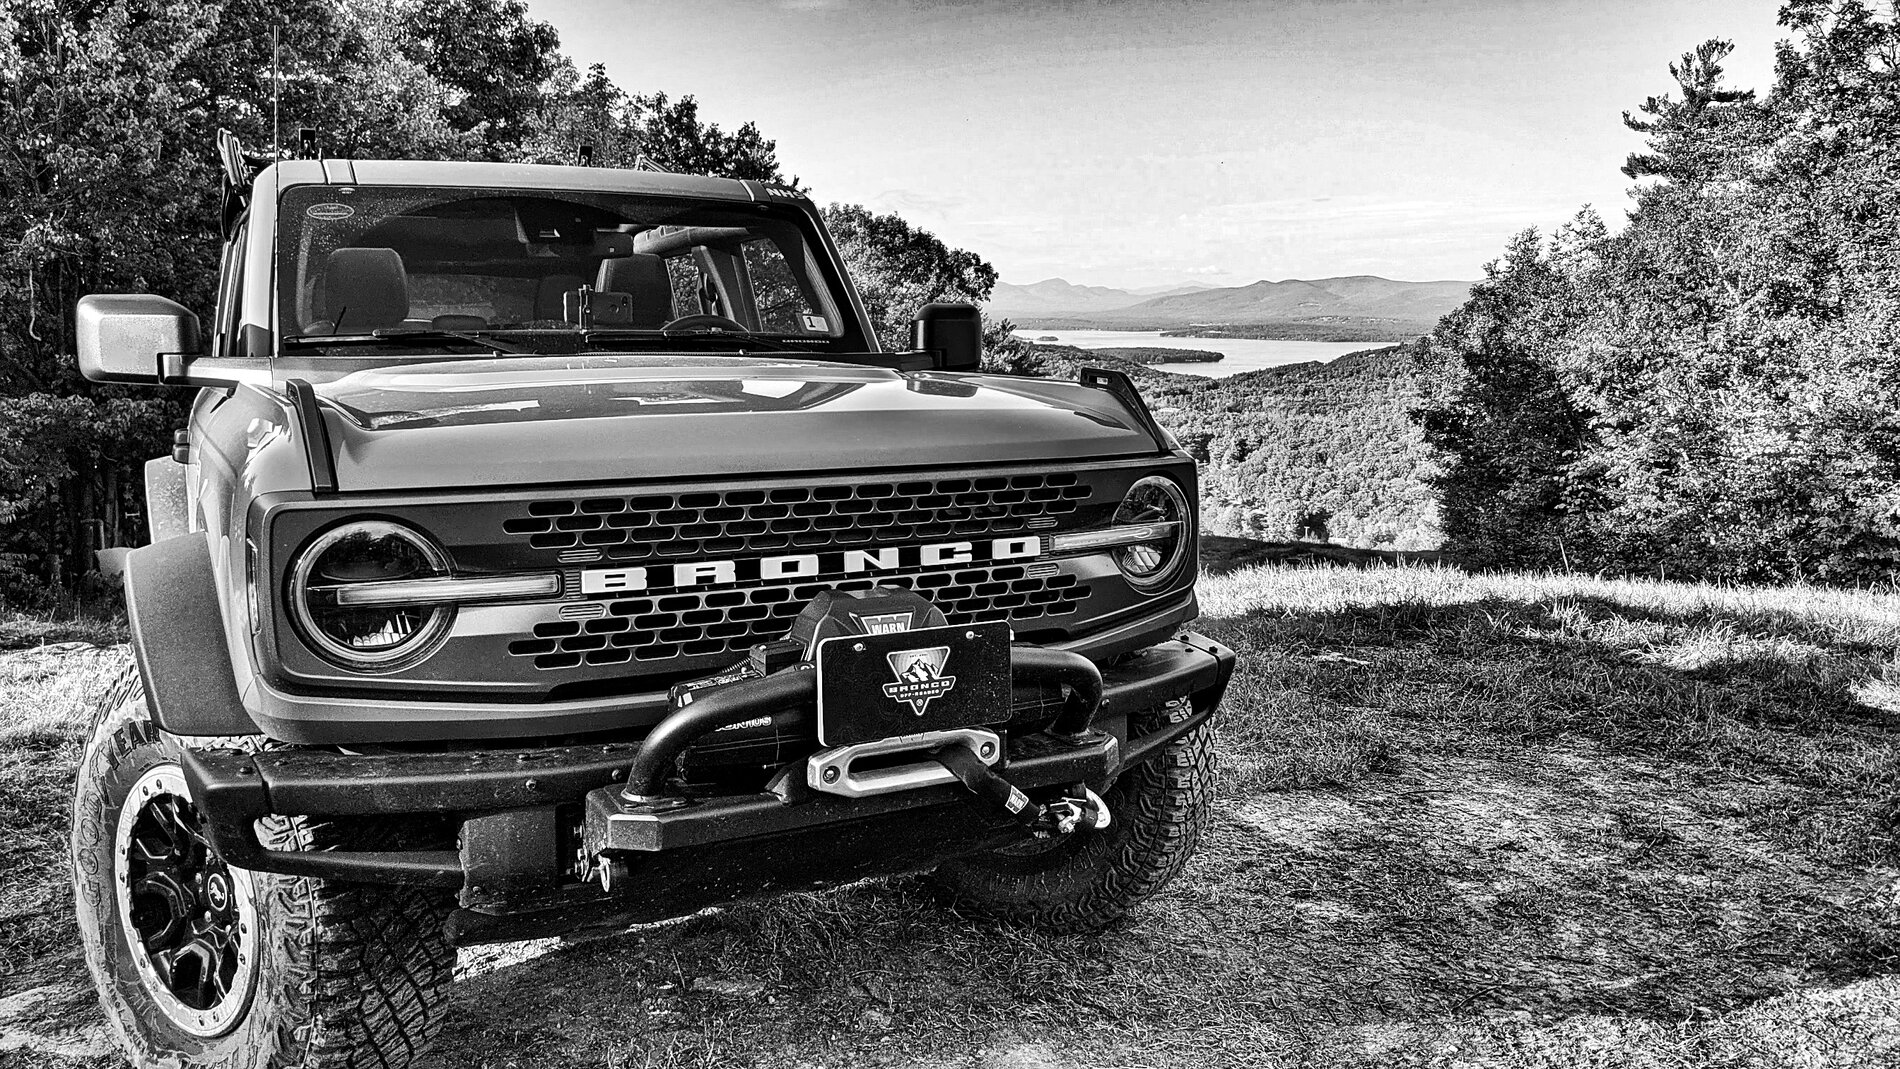 Ford Bronco Bronco Off-Roadeo Photo Competition D0118766-5C15-407A-A532-11FFA3A308C9